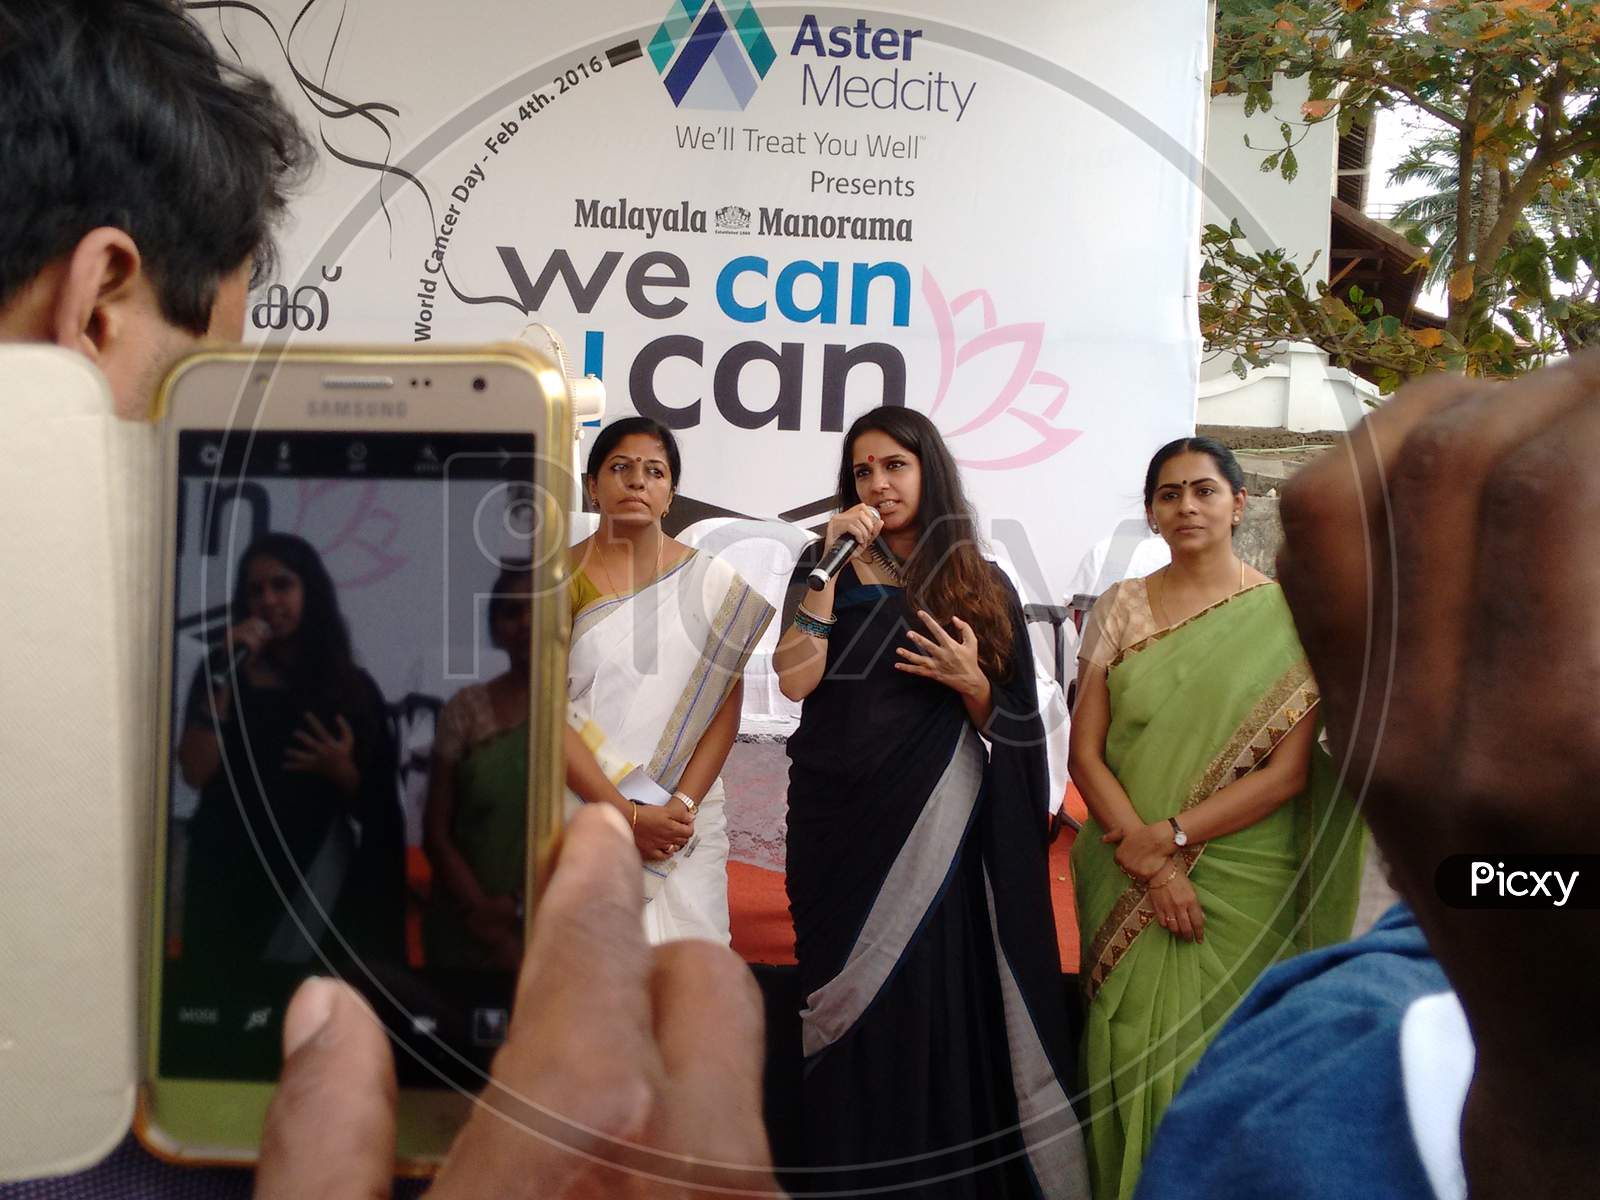 14 Feb 2016 , Actress Aparna Nair during aster medcity we can I can Cancer awareness kite flying festival at fort kochi